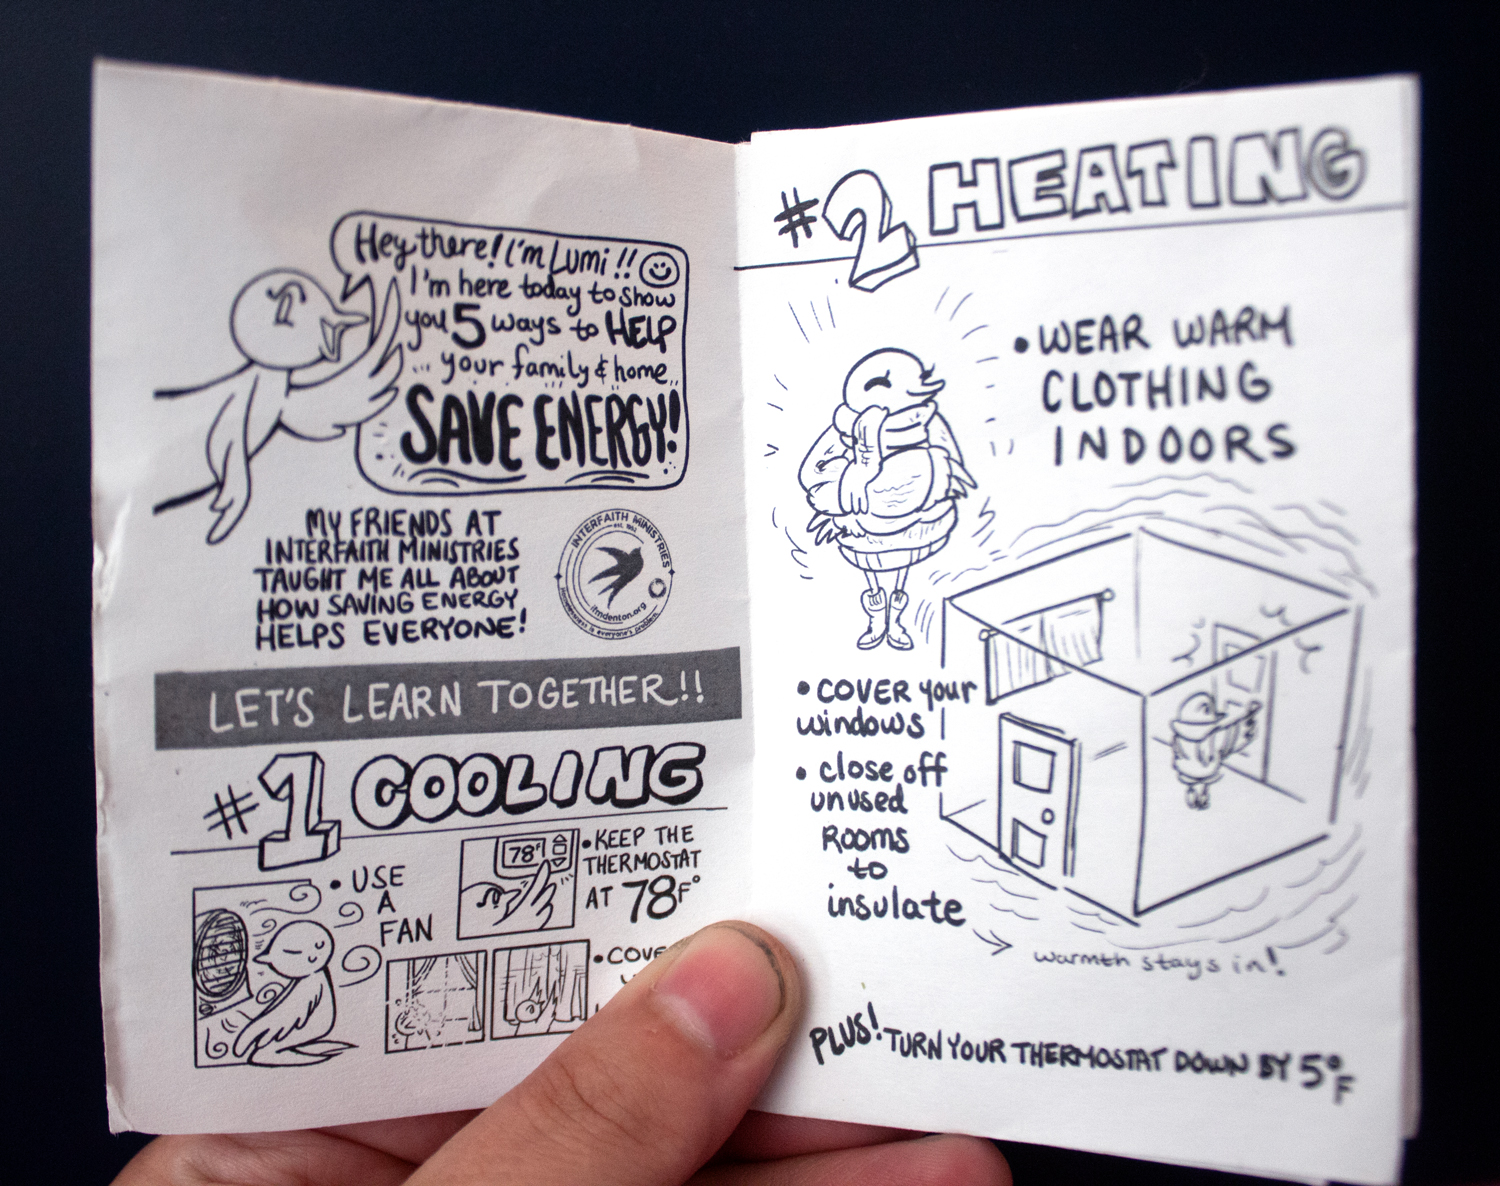 The zine held open showing tips for energy savng.